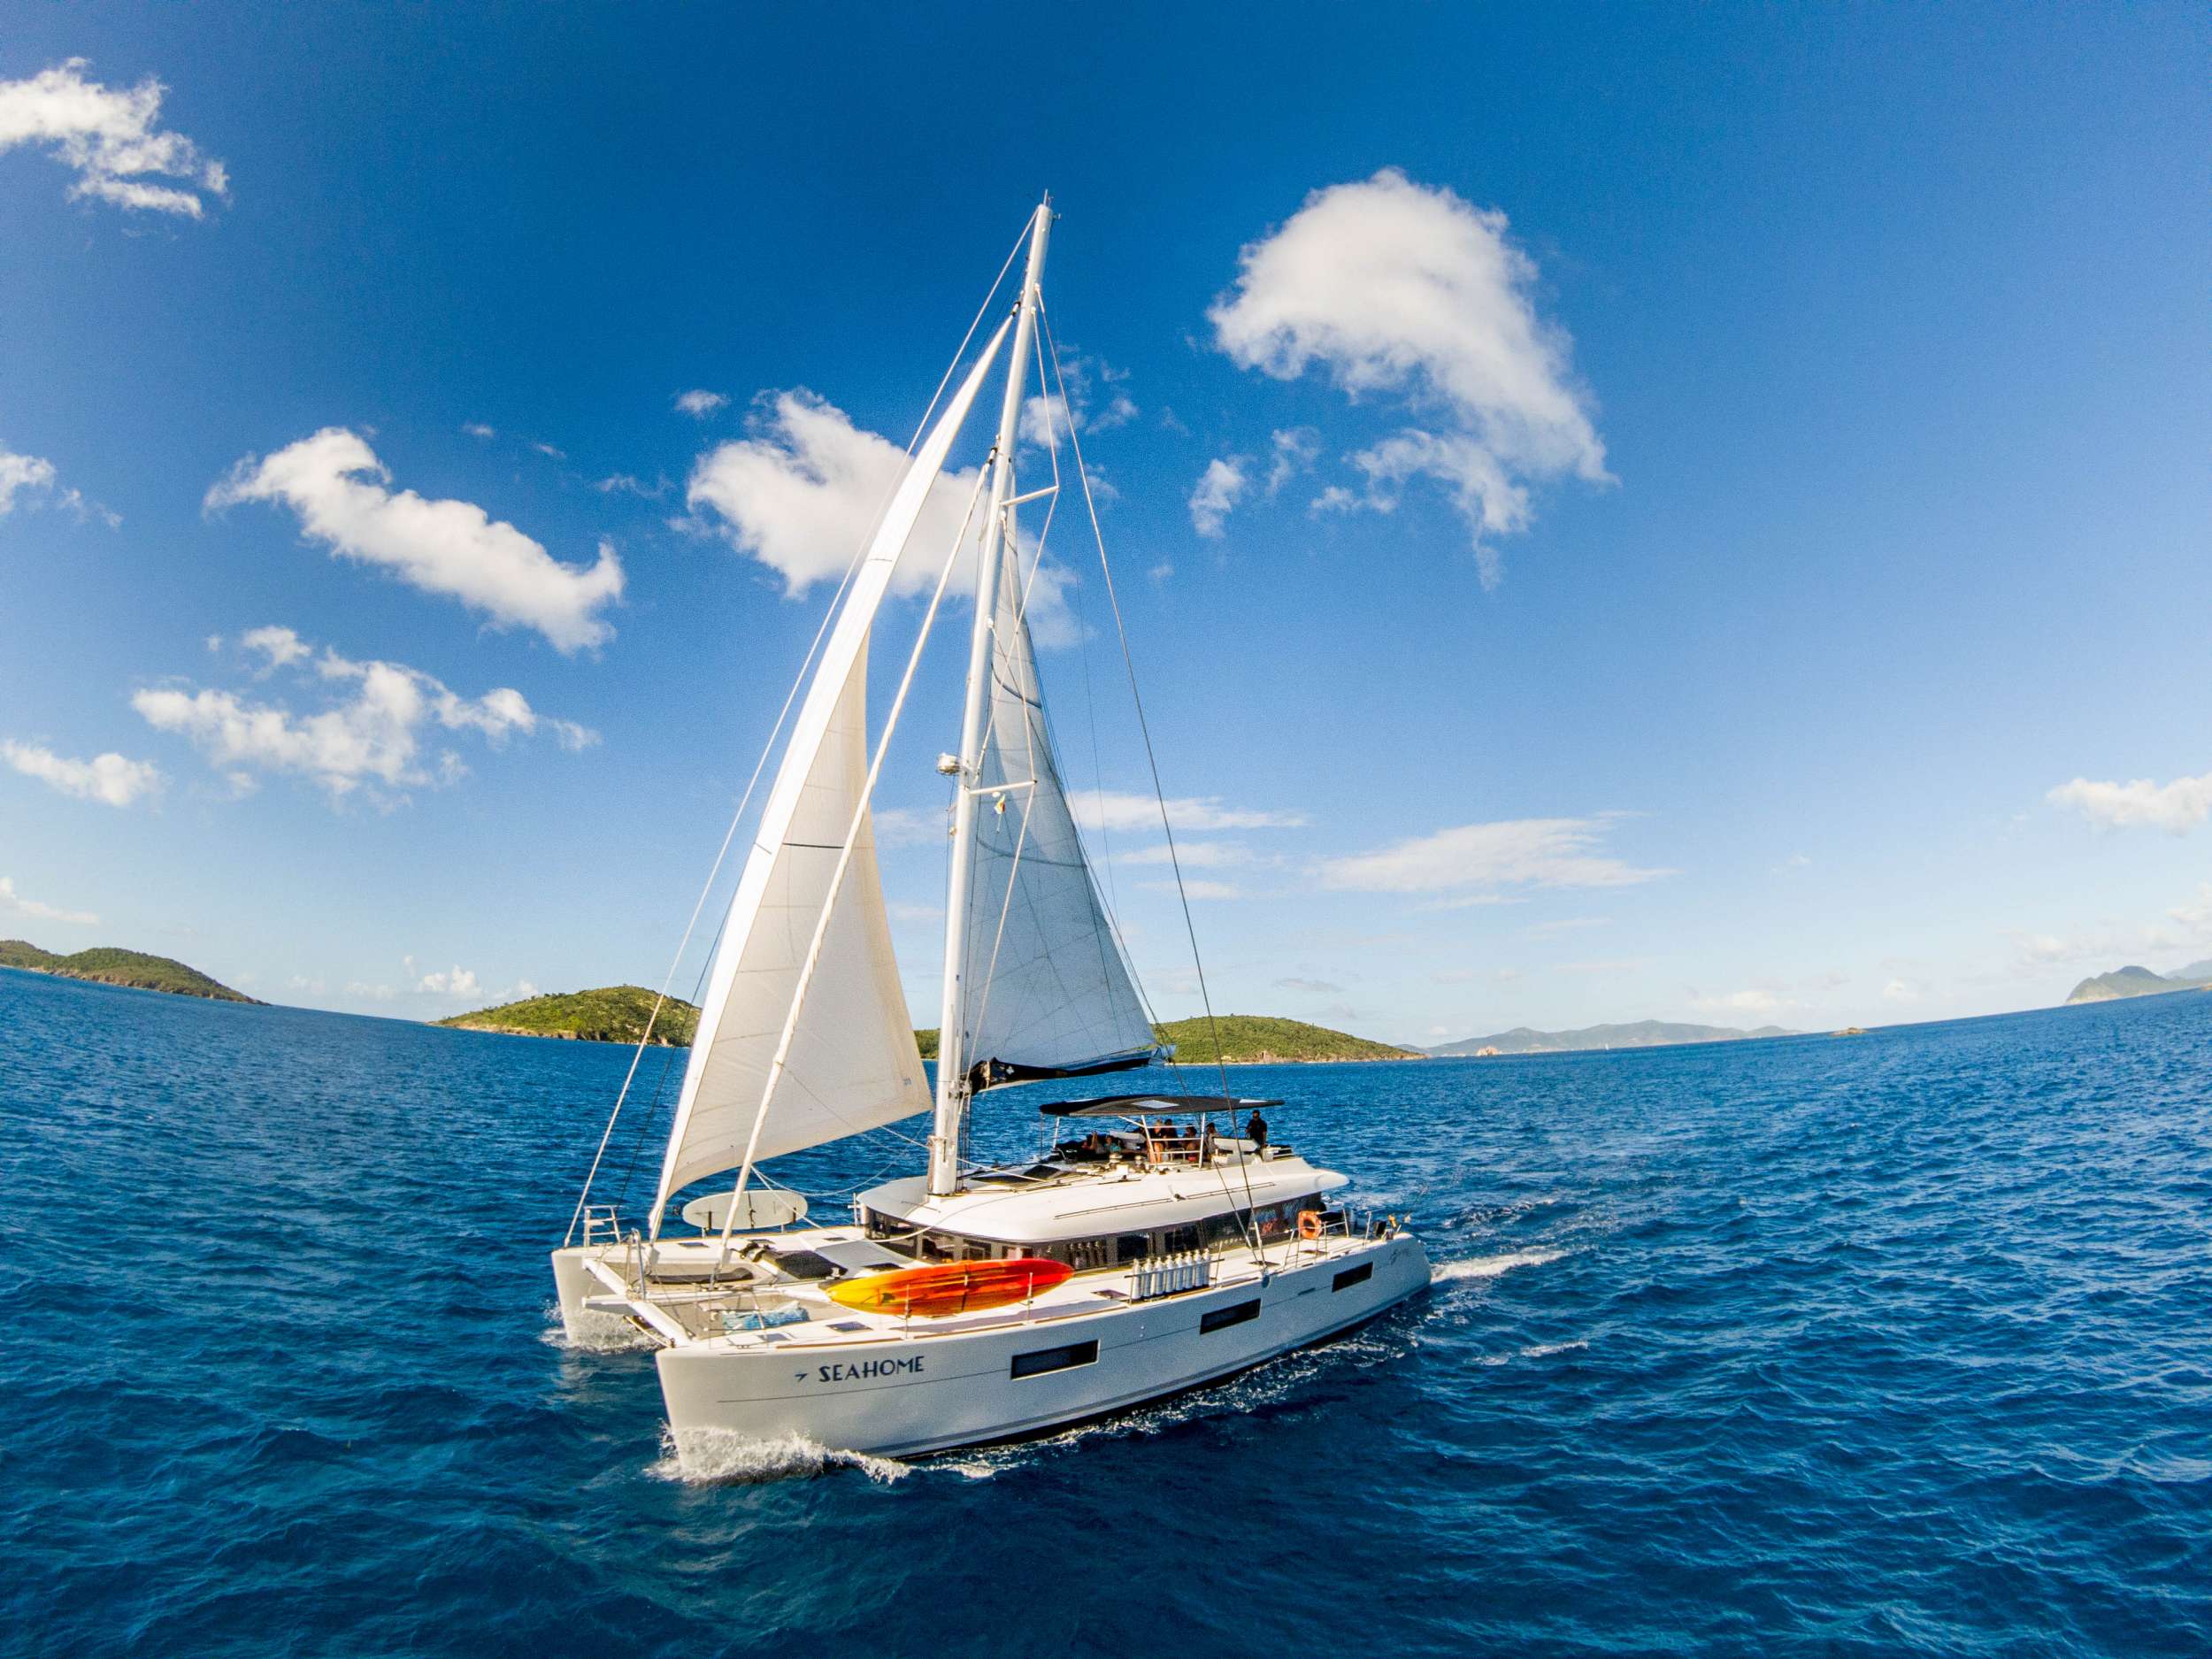 seahome - Luxury yacht charter Antigua and Barbuda & Boat hire in Caribbean 1